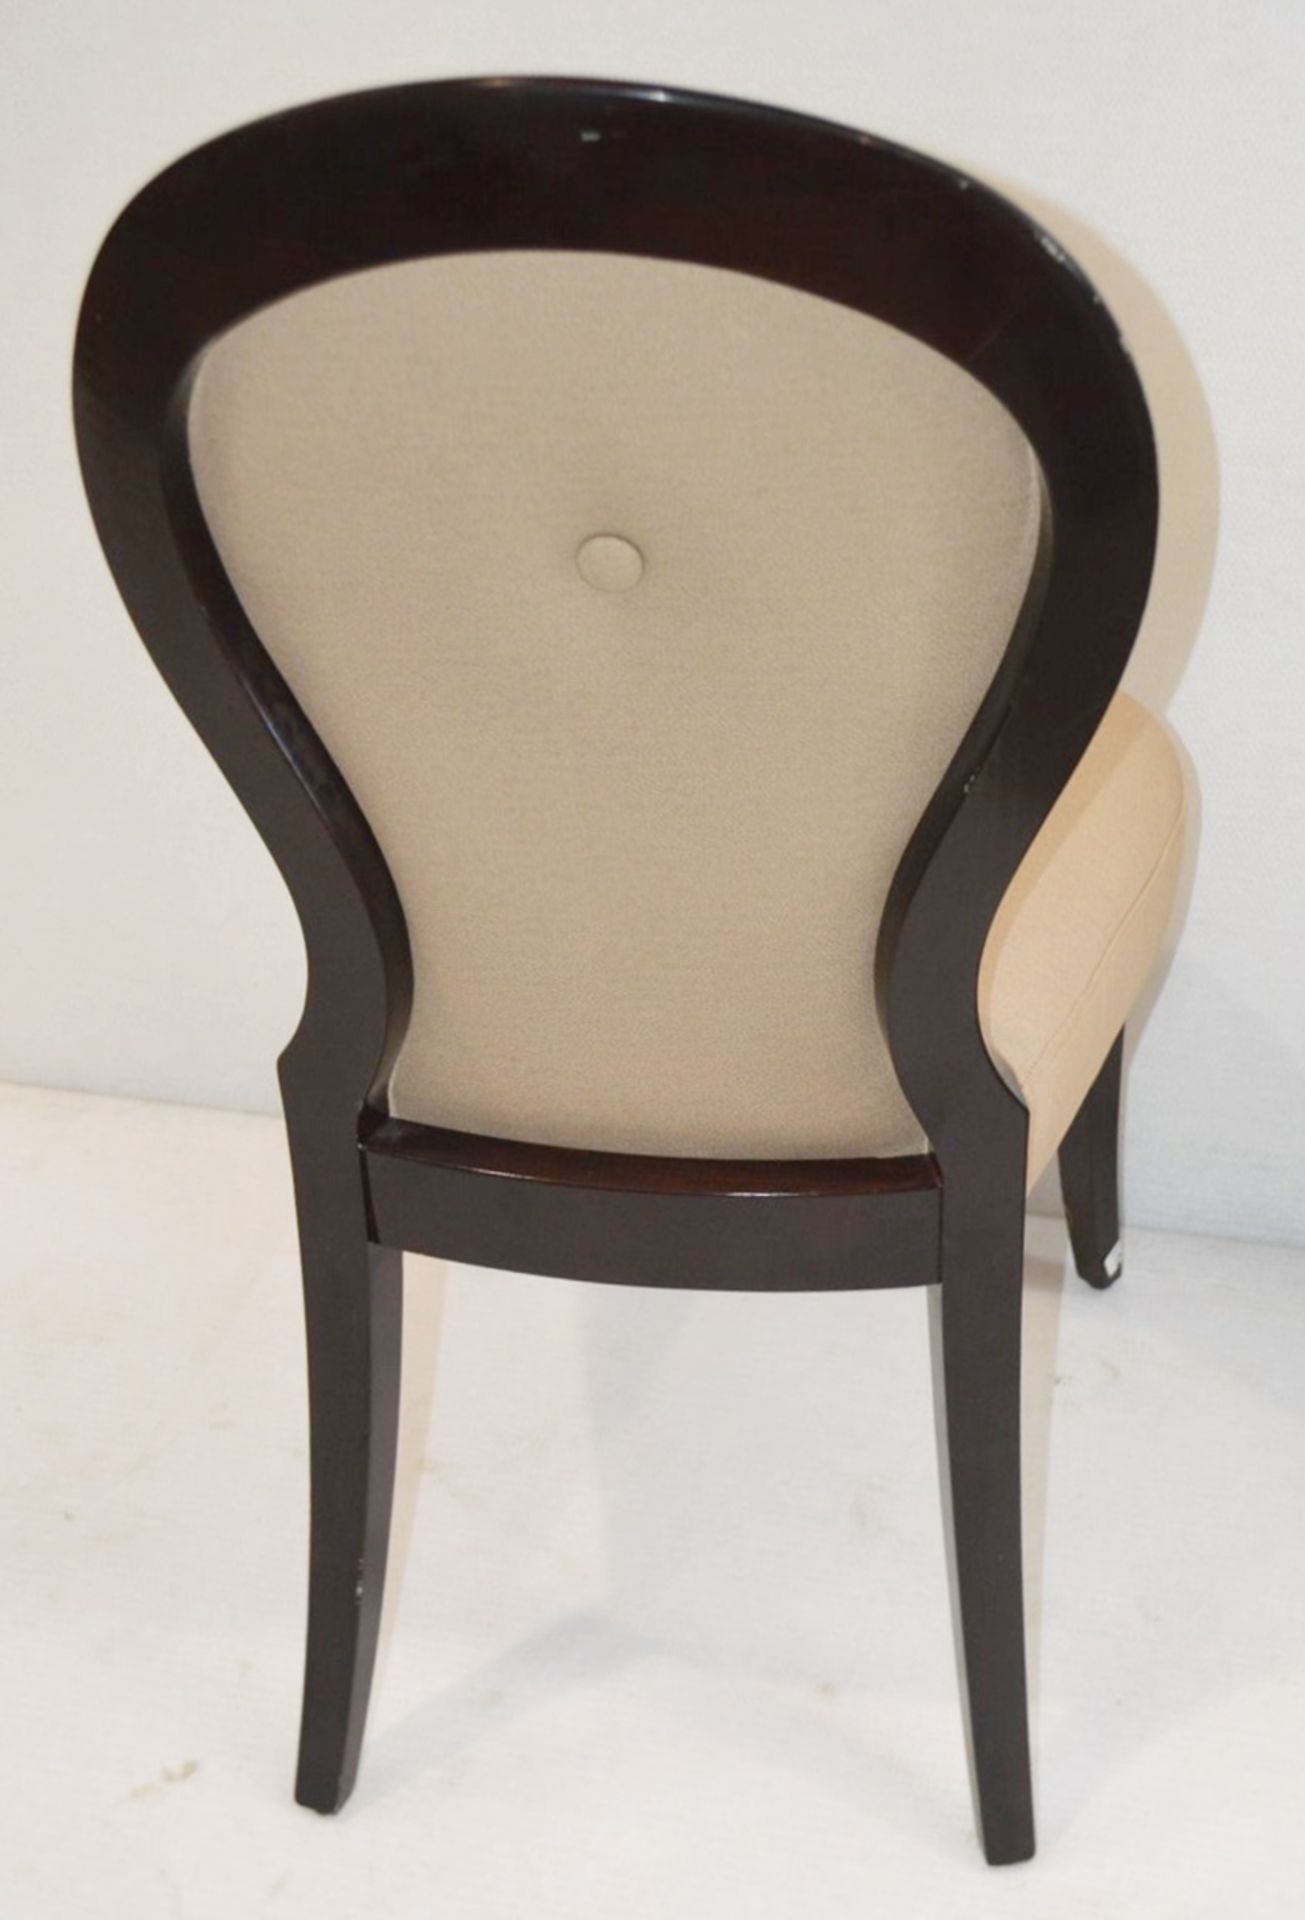 1 x Cushion Backed Chair With Curved Legs - Dimensions: H100 x W49 x D50cm / Seat 48cm - Ref: HMS127 - Image 4 of 4